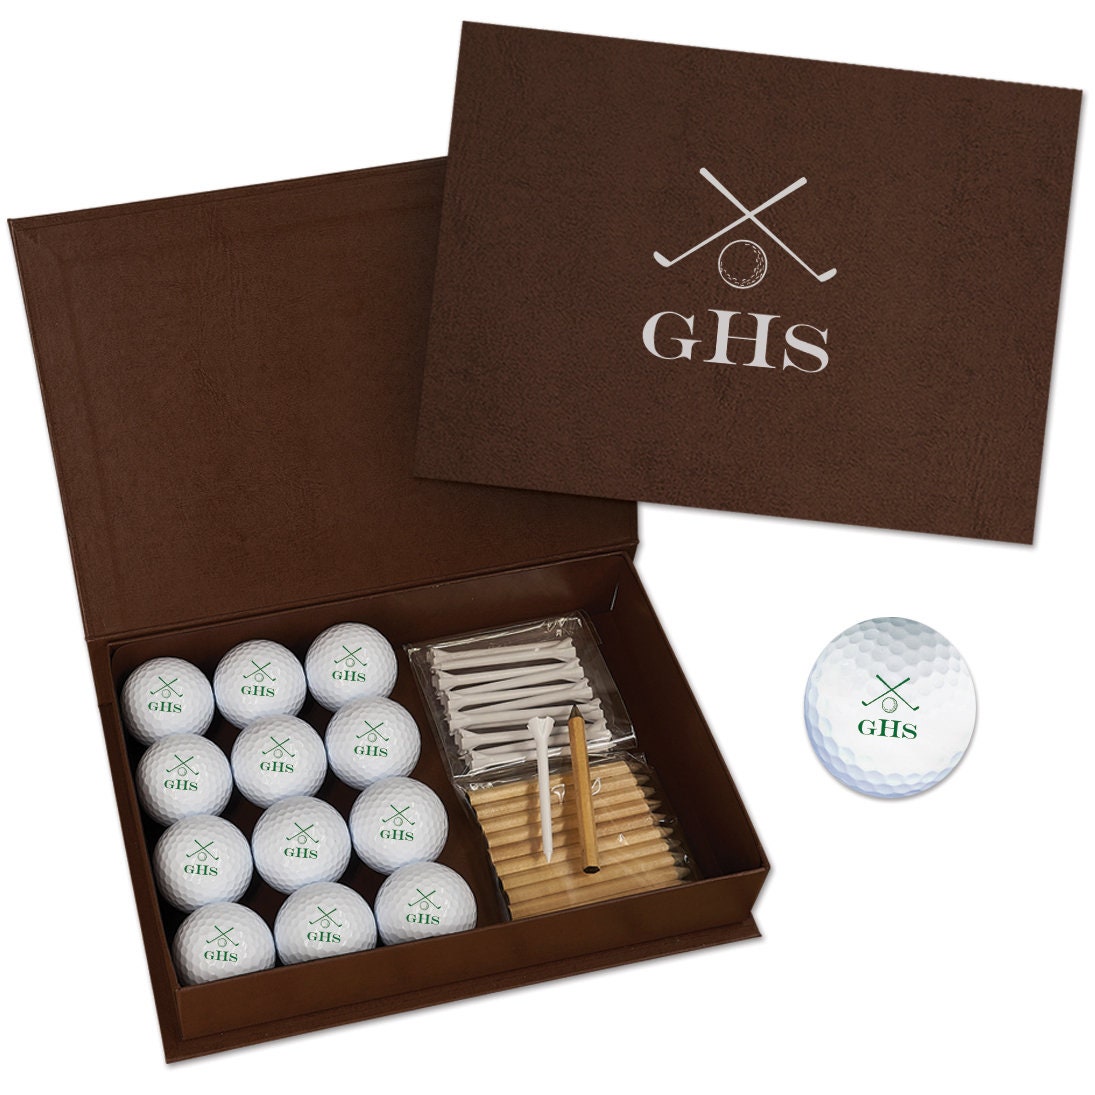 Holiday Golf Gift Pack - This gift is unique, affordable, and guaranteed to  get used. Made by golfers for golfers.